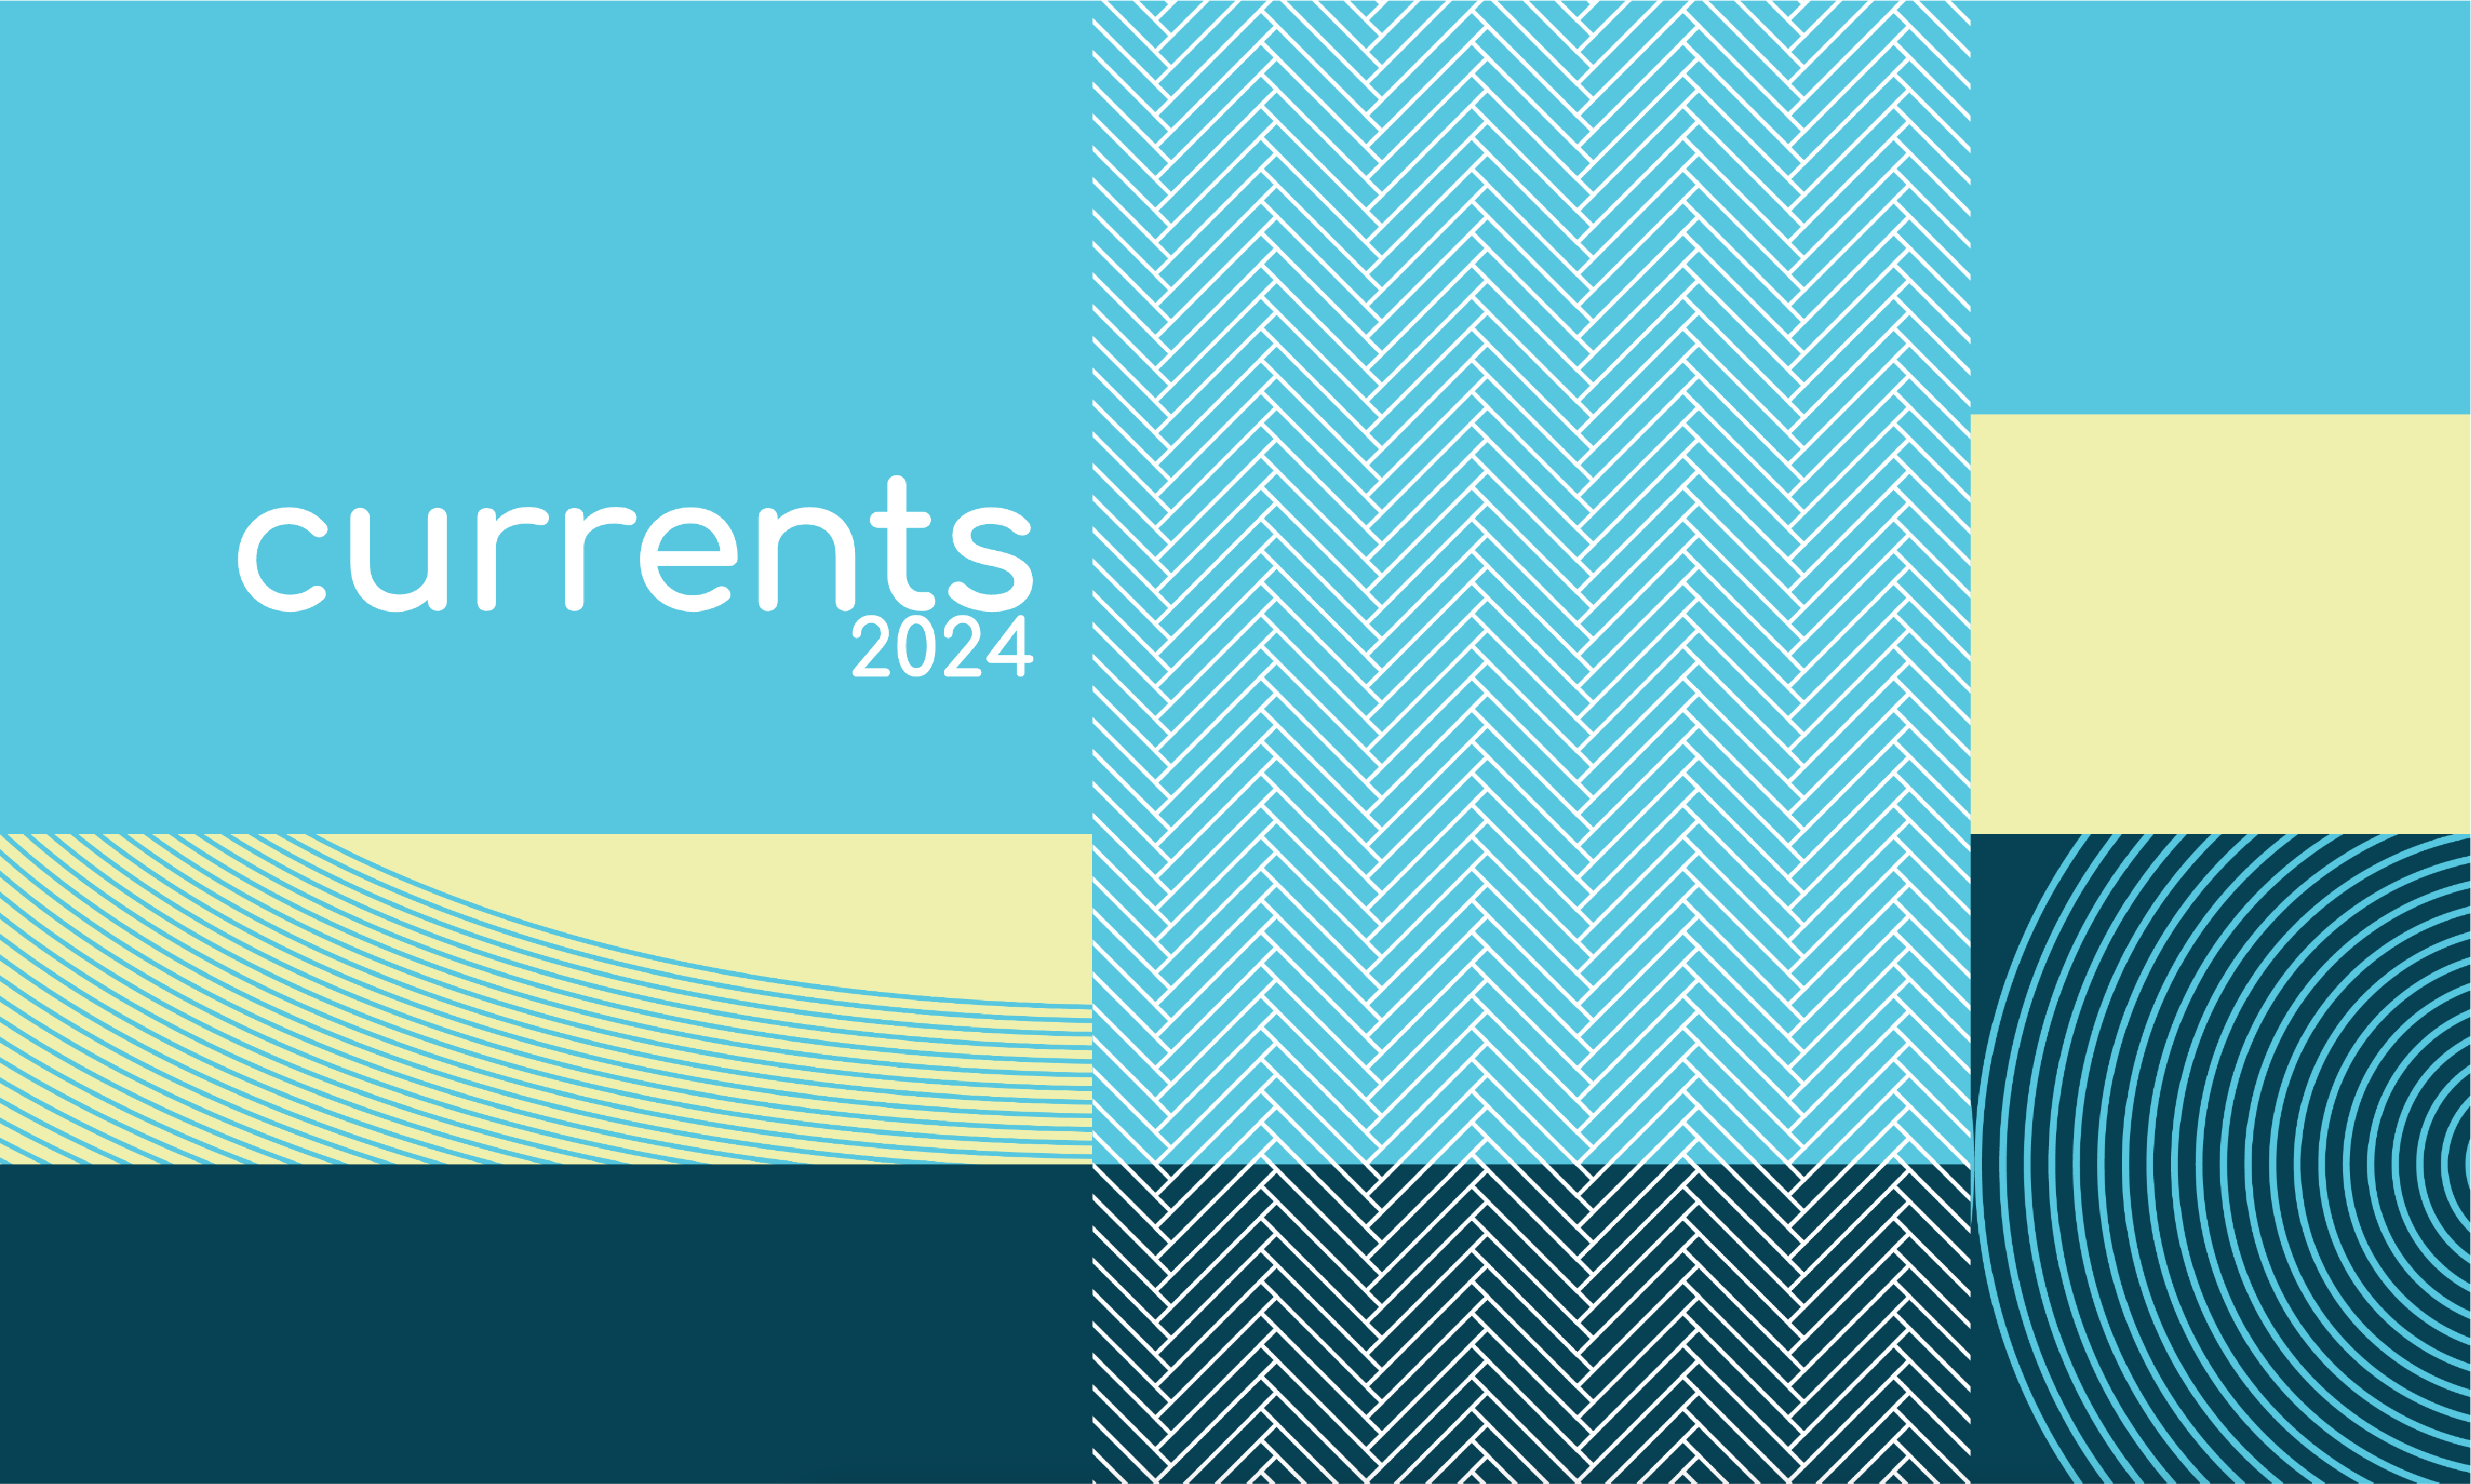 Currents graphic with light blue background